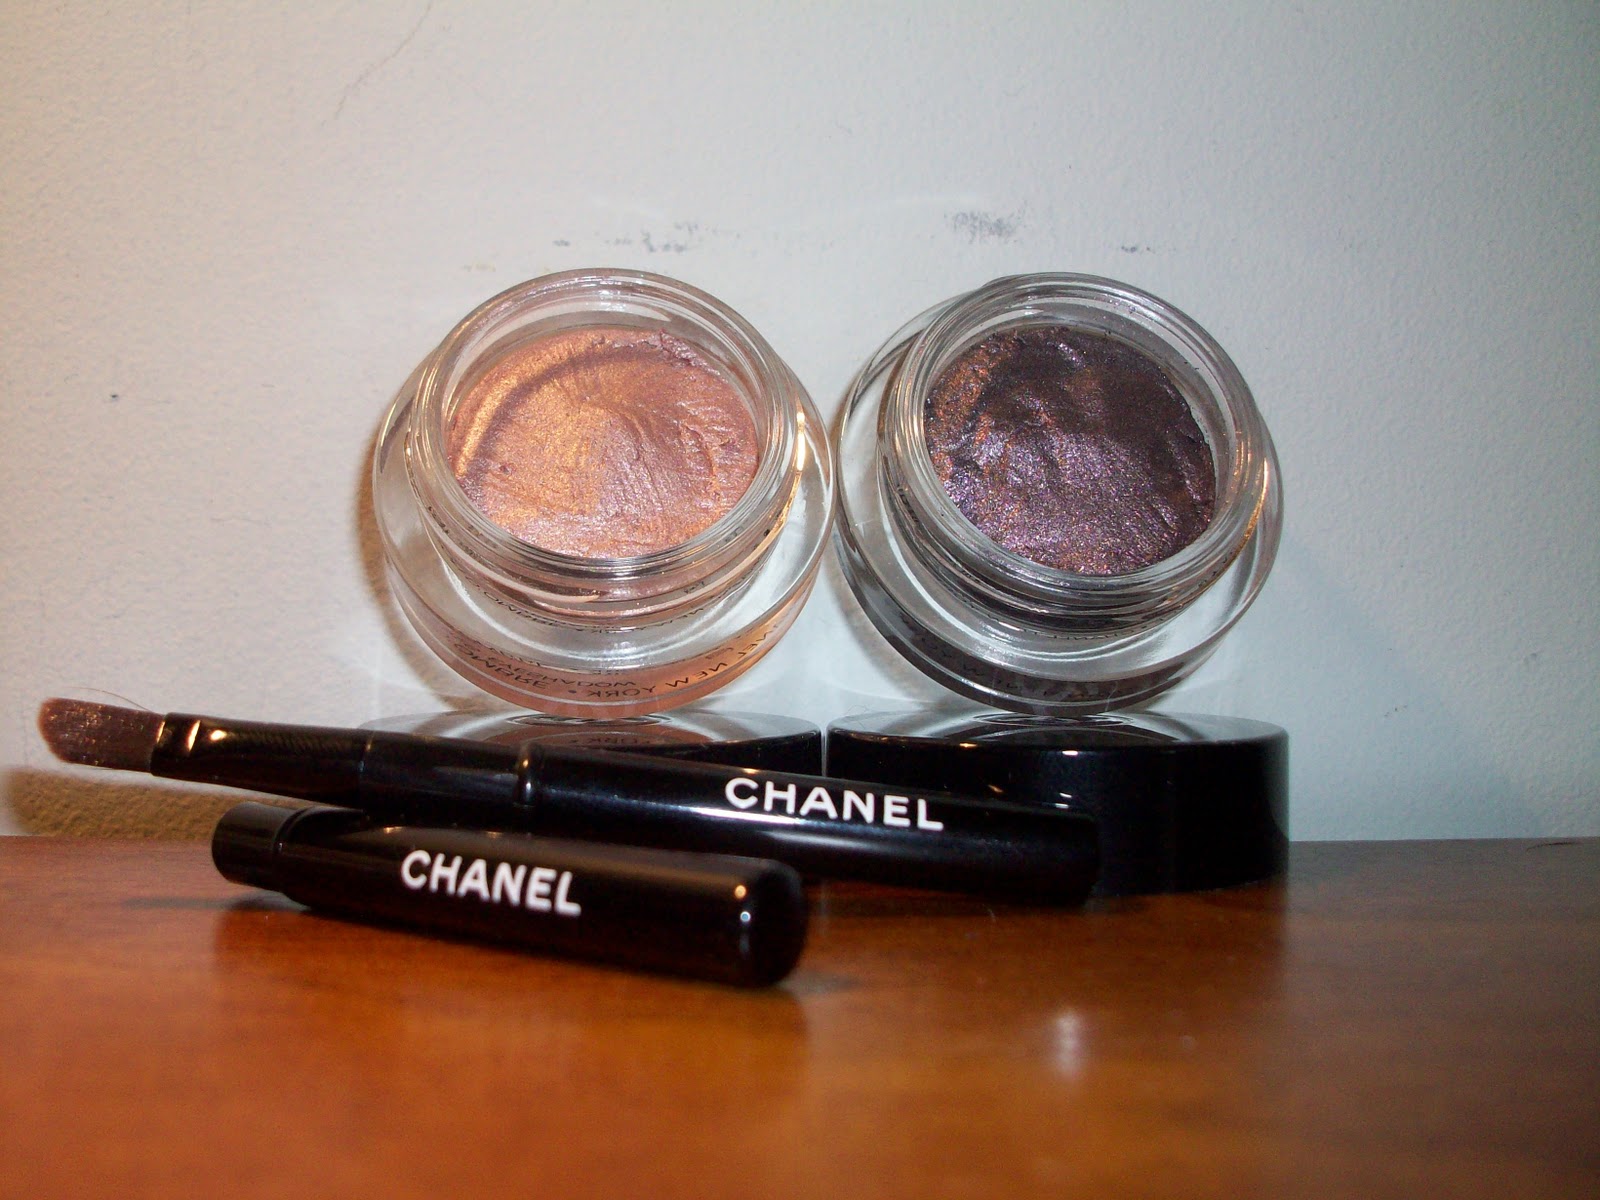 Luxury on the Lips: Chanel Illusion D'Ombre - Review